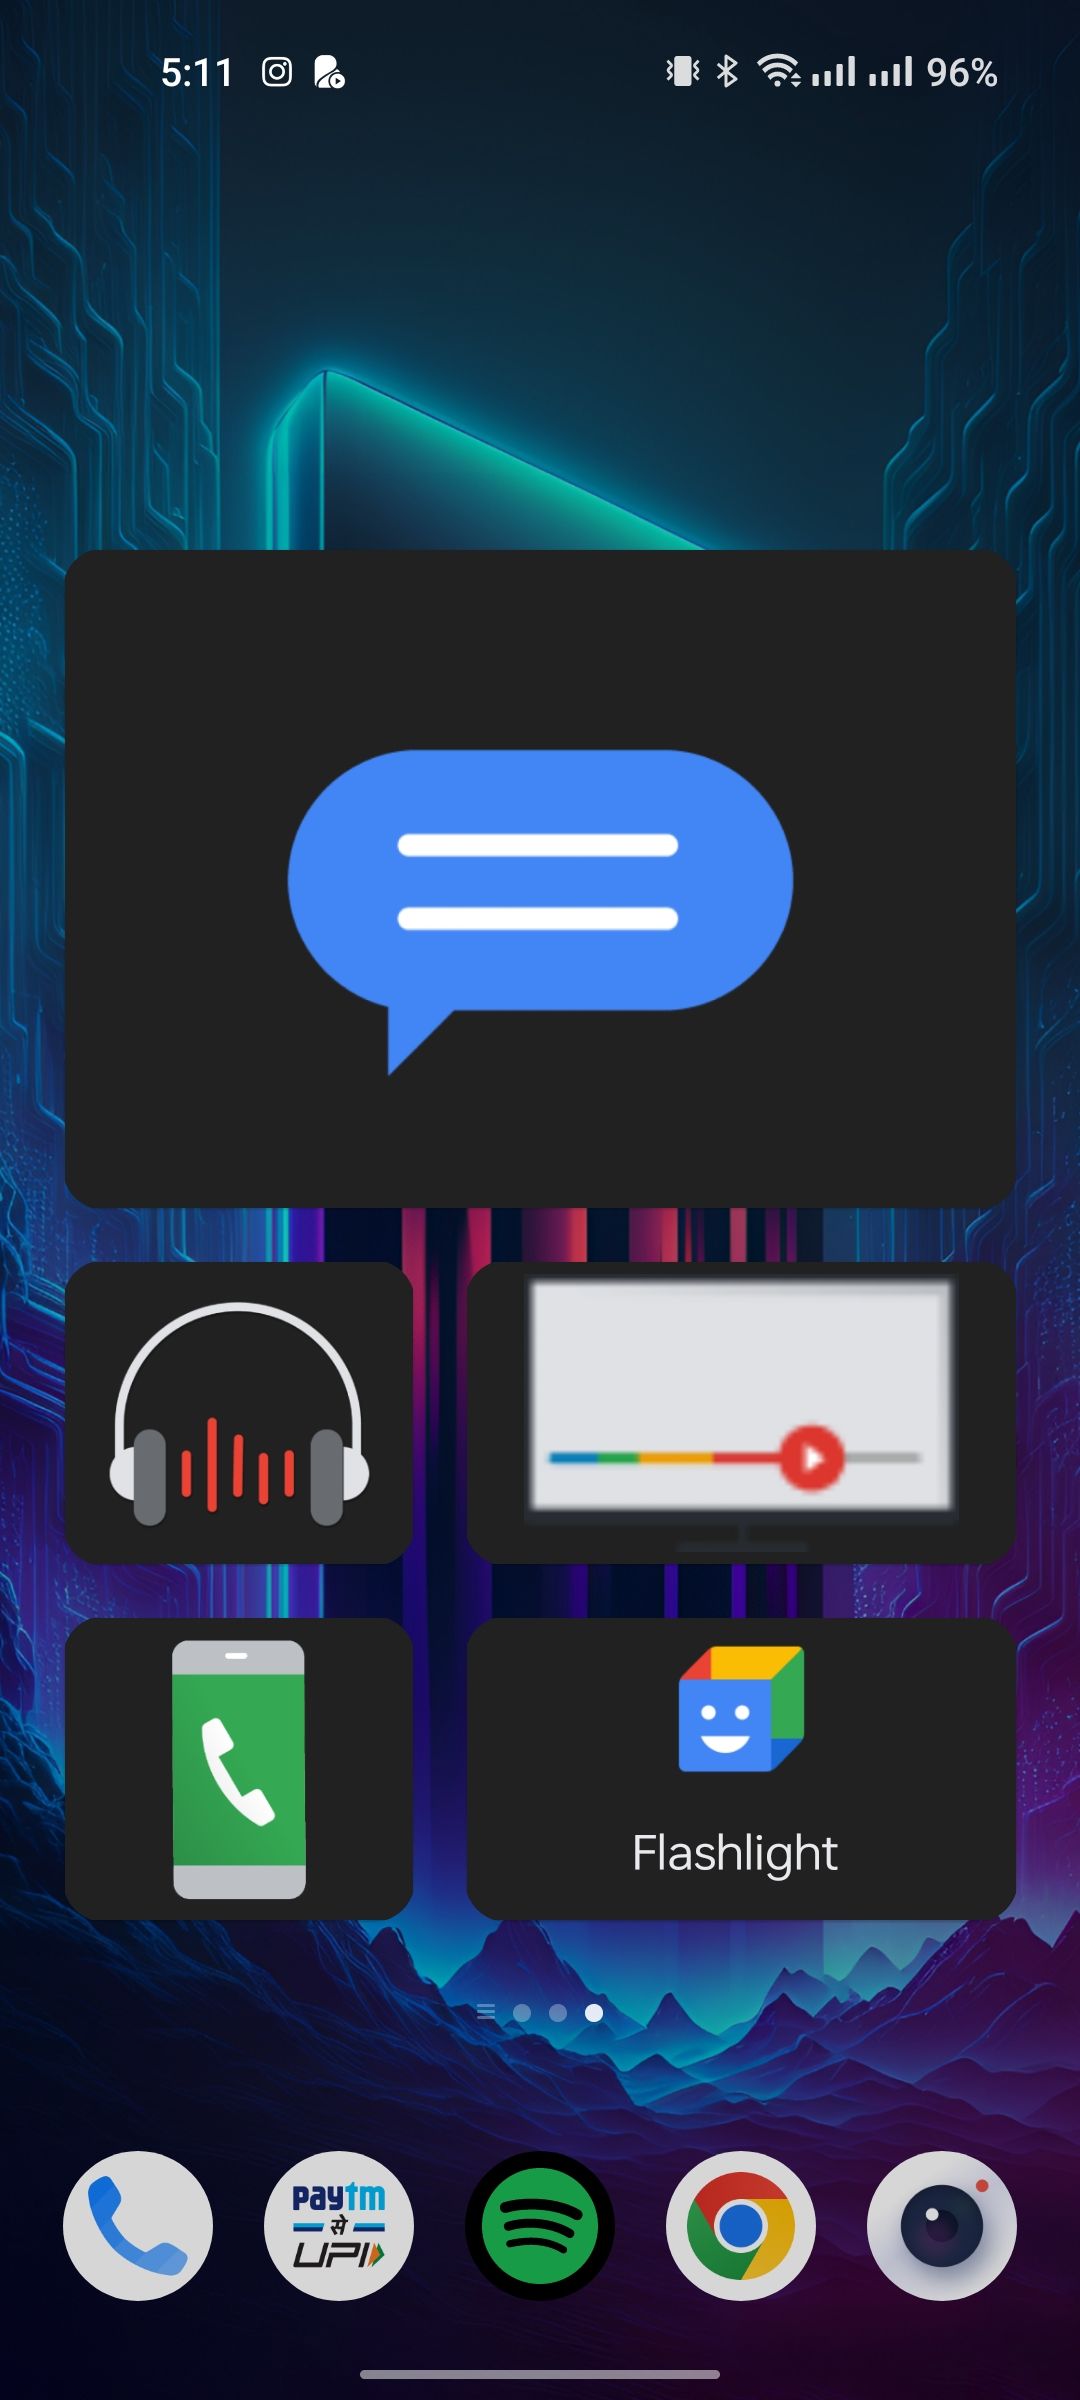 Action Blocks on home screen as widgets